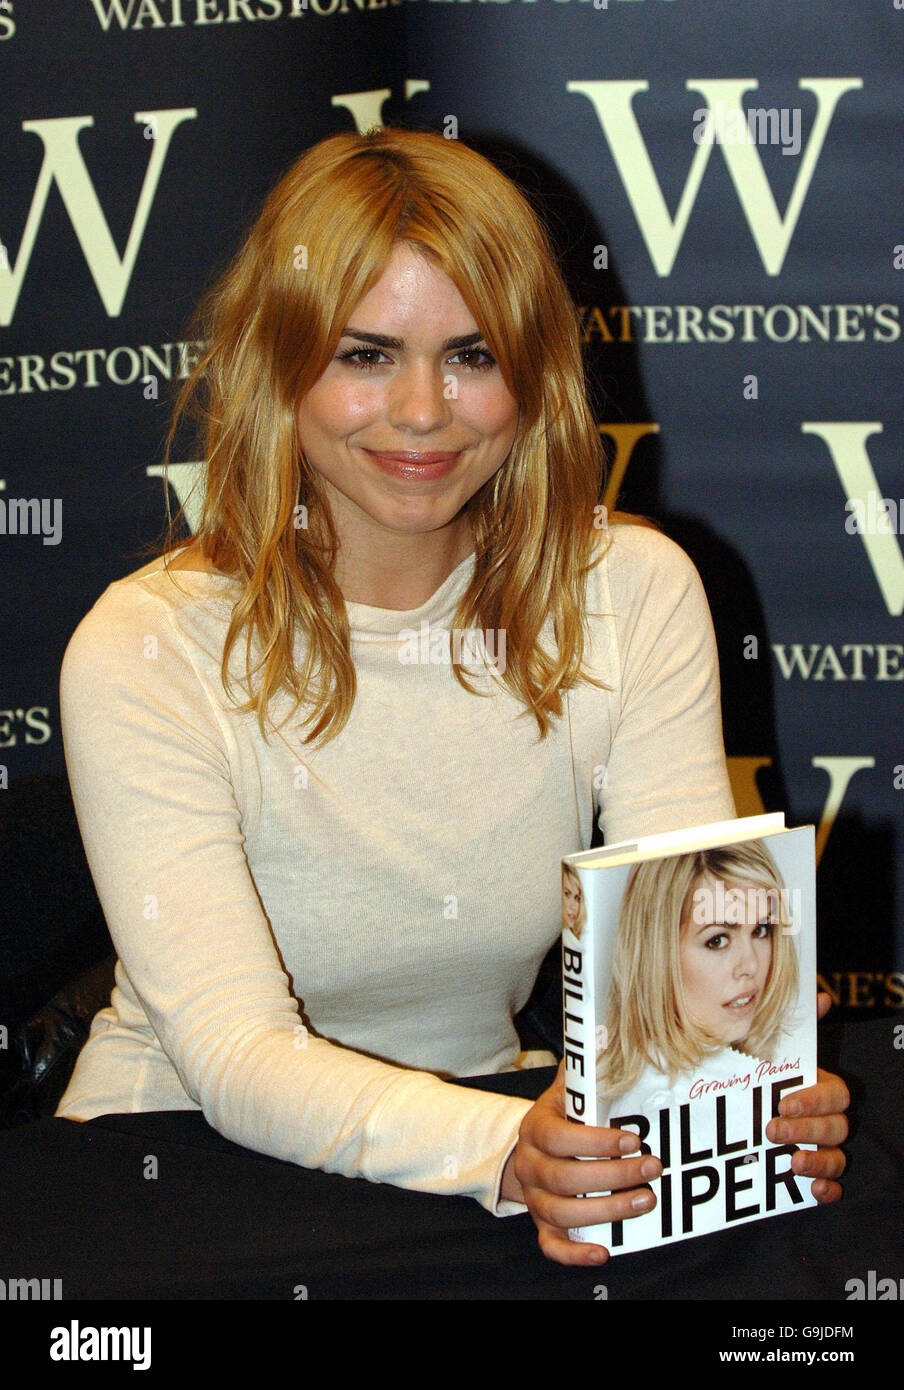 Billie Piper attends a signing for her new book, Growing Pains, at Waterstone's in Oxford Street, central London. Stock Photo